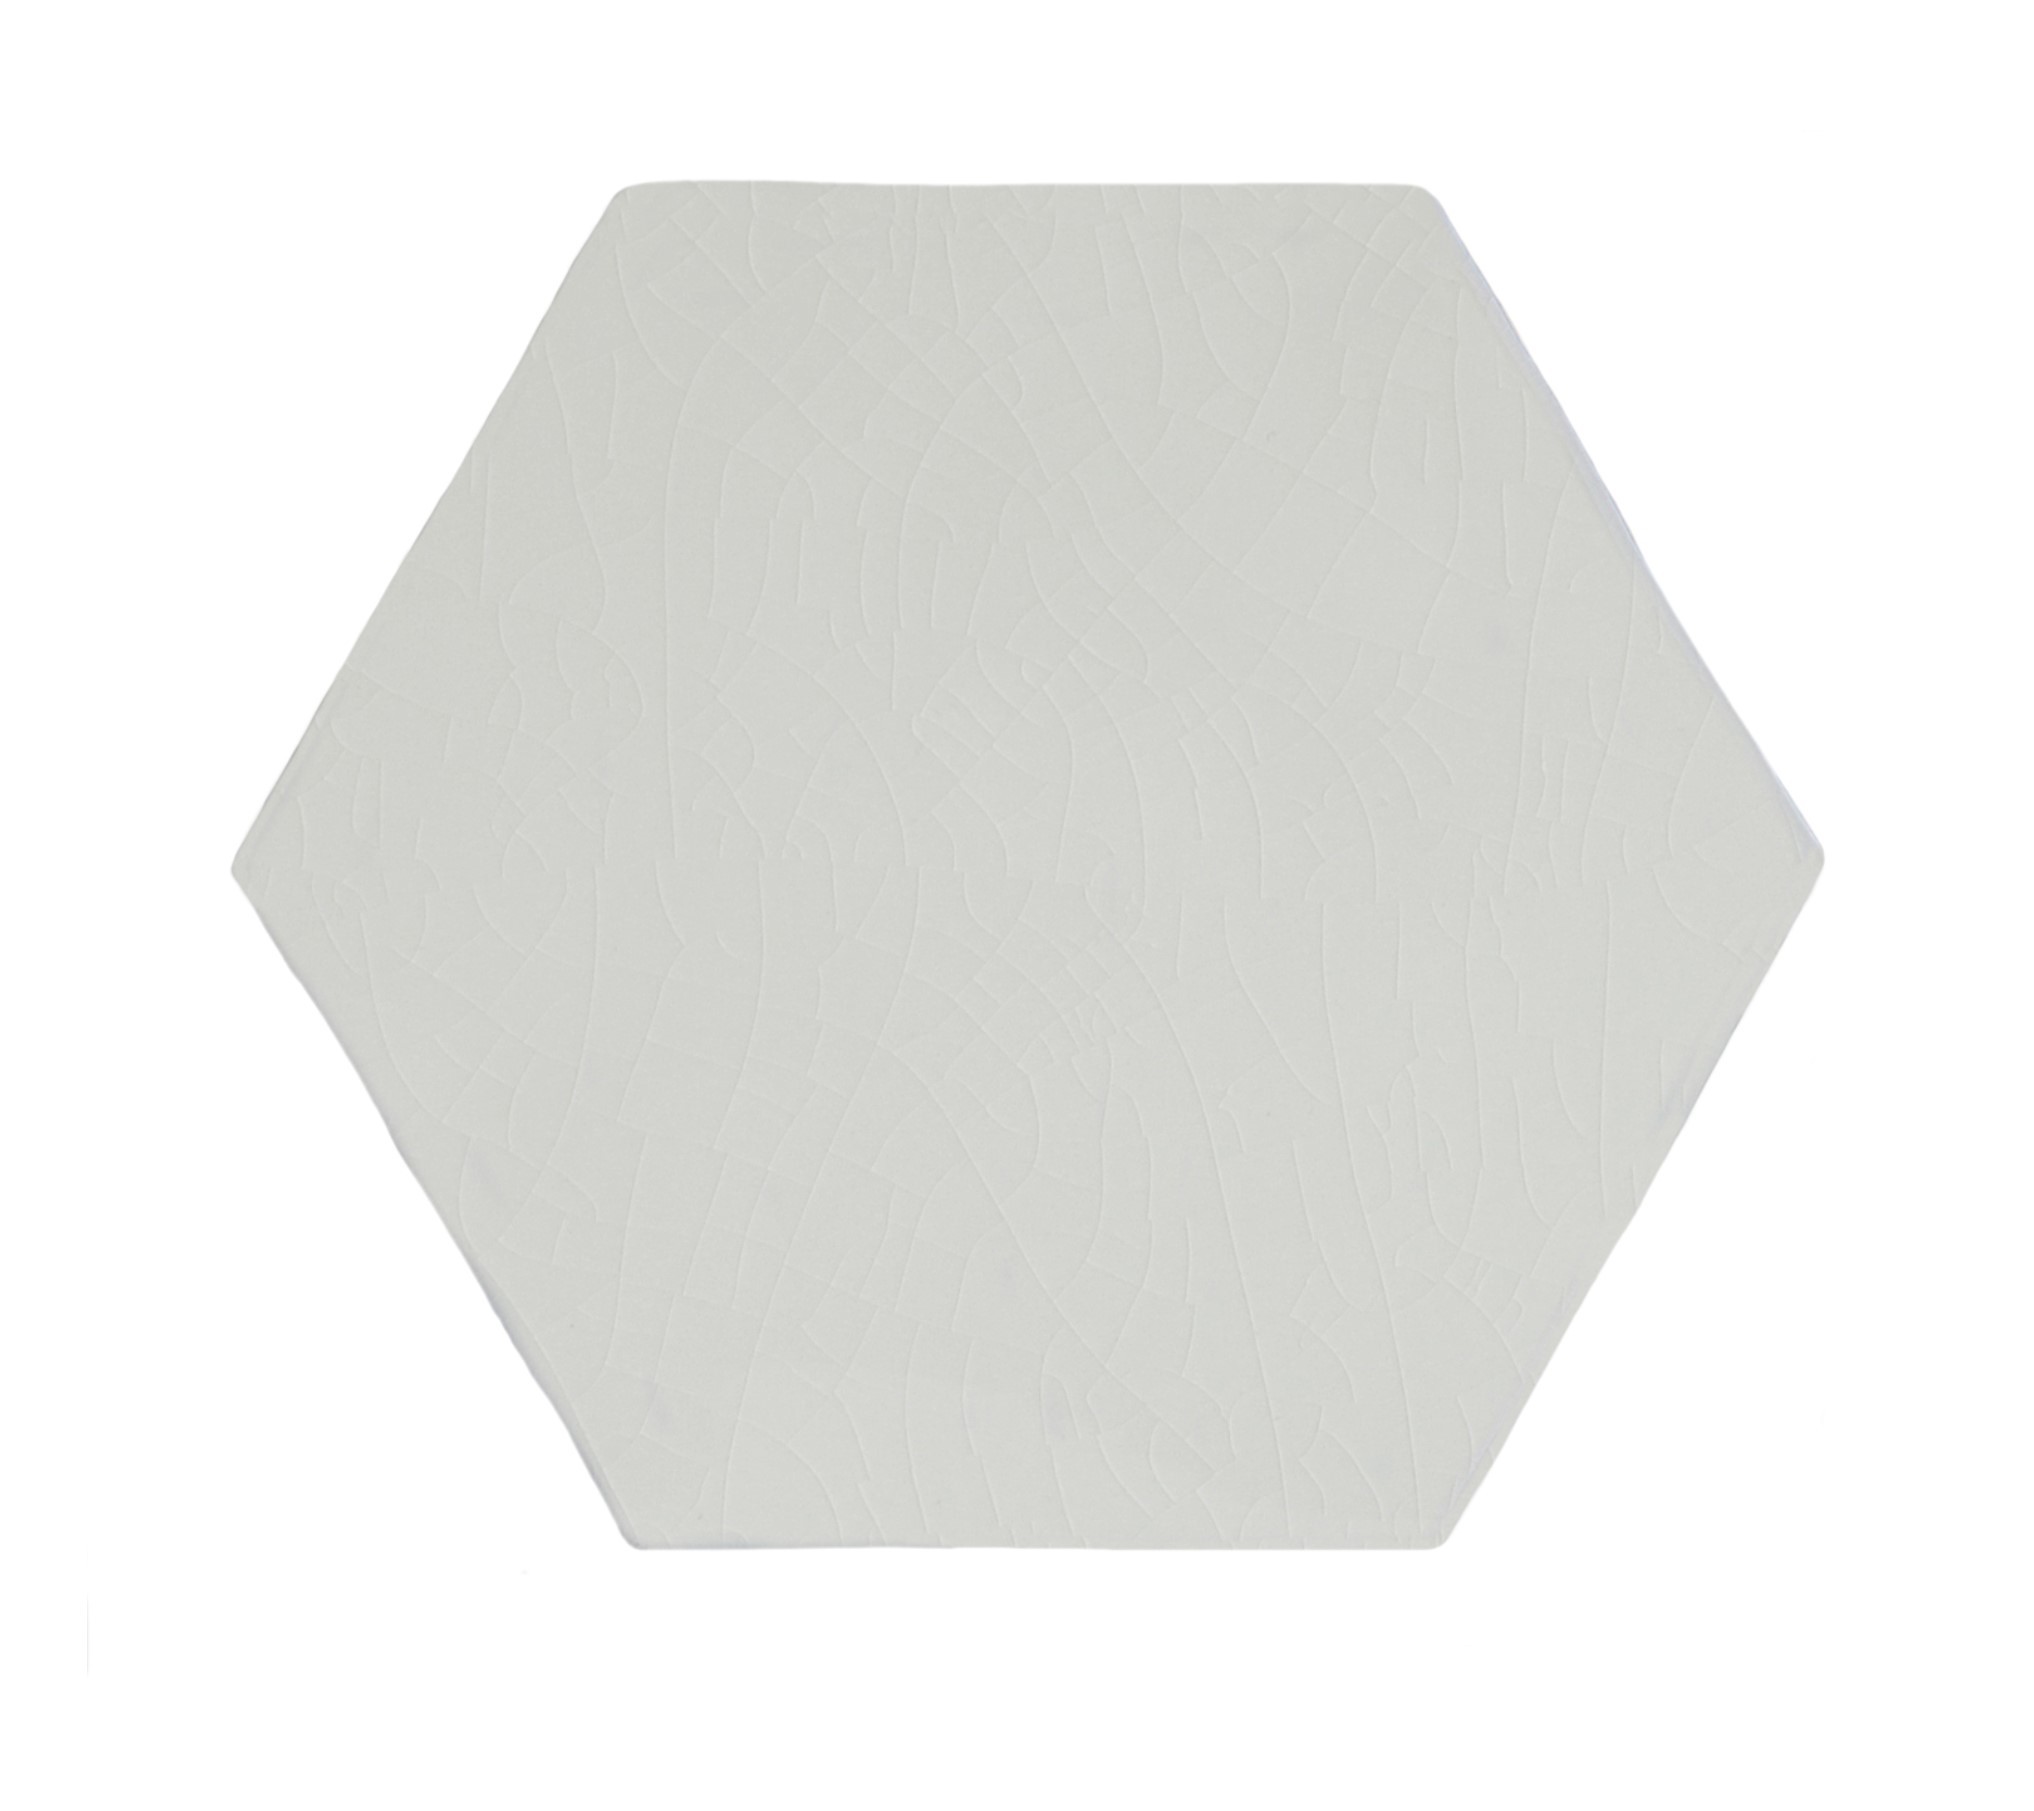 Wight Hexagon Gloss, product variant image